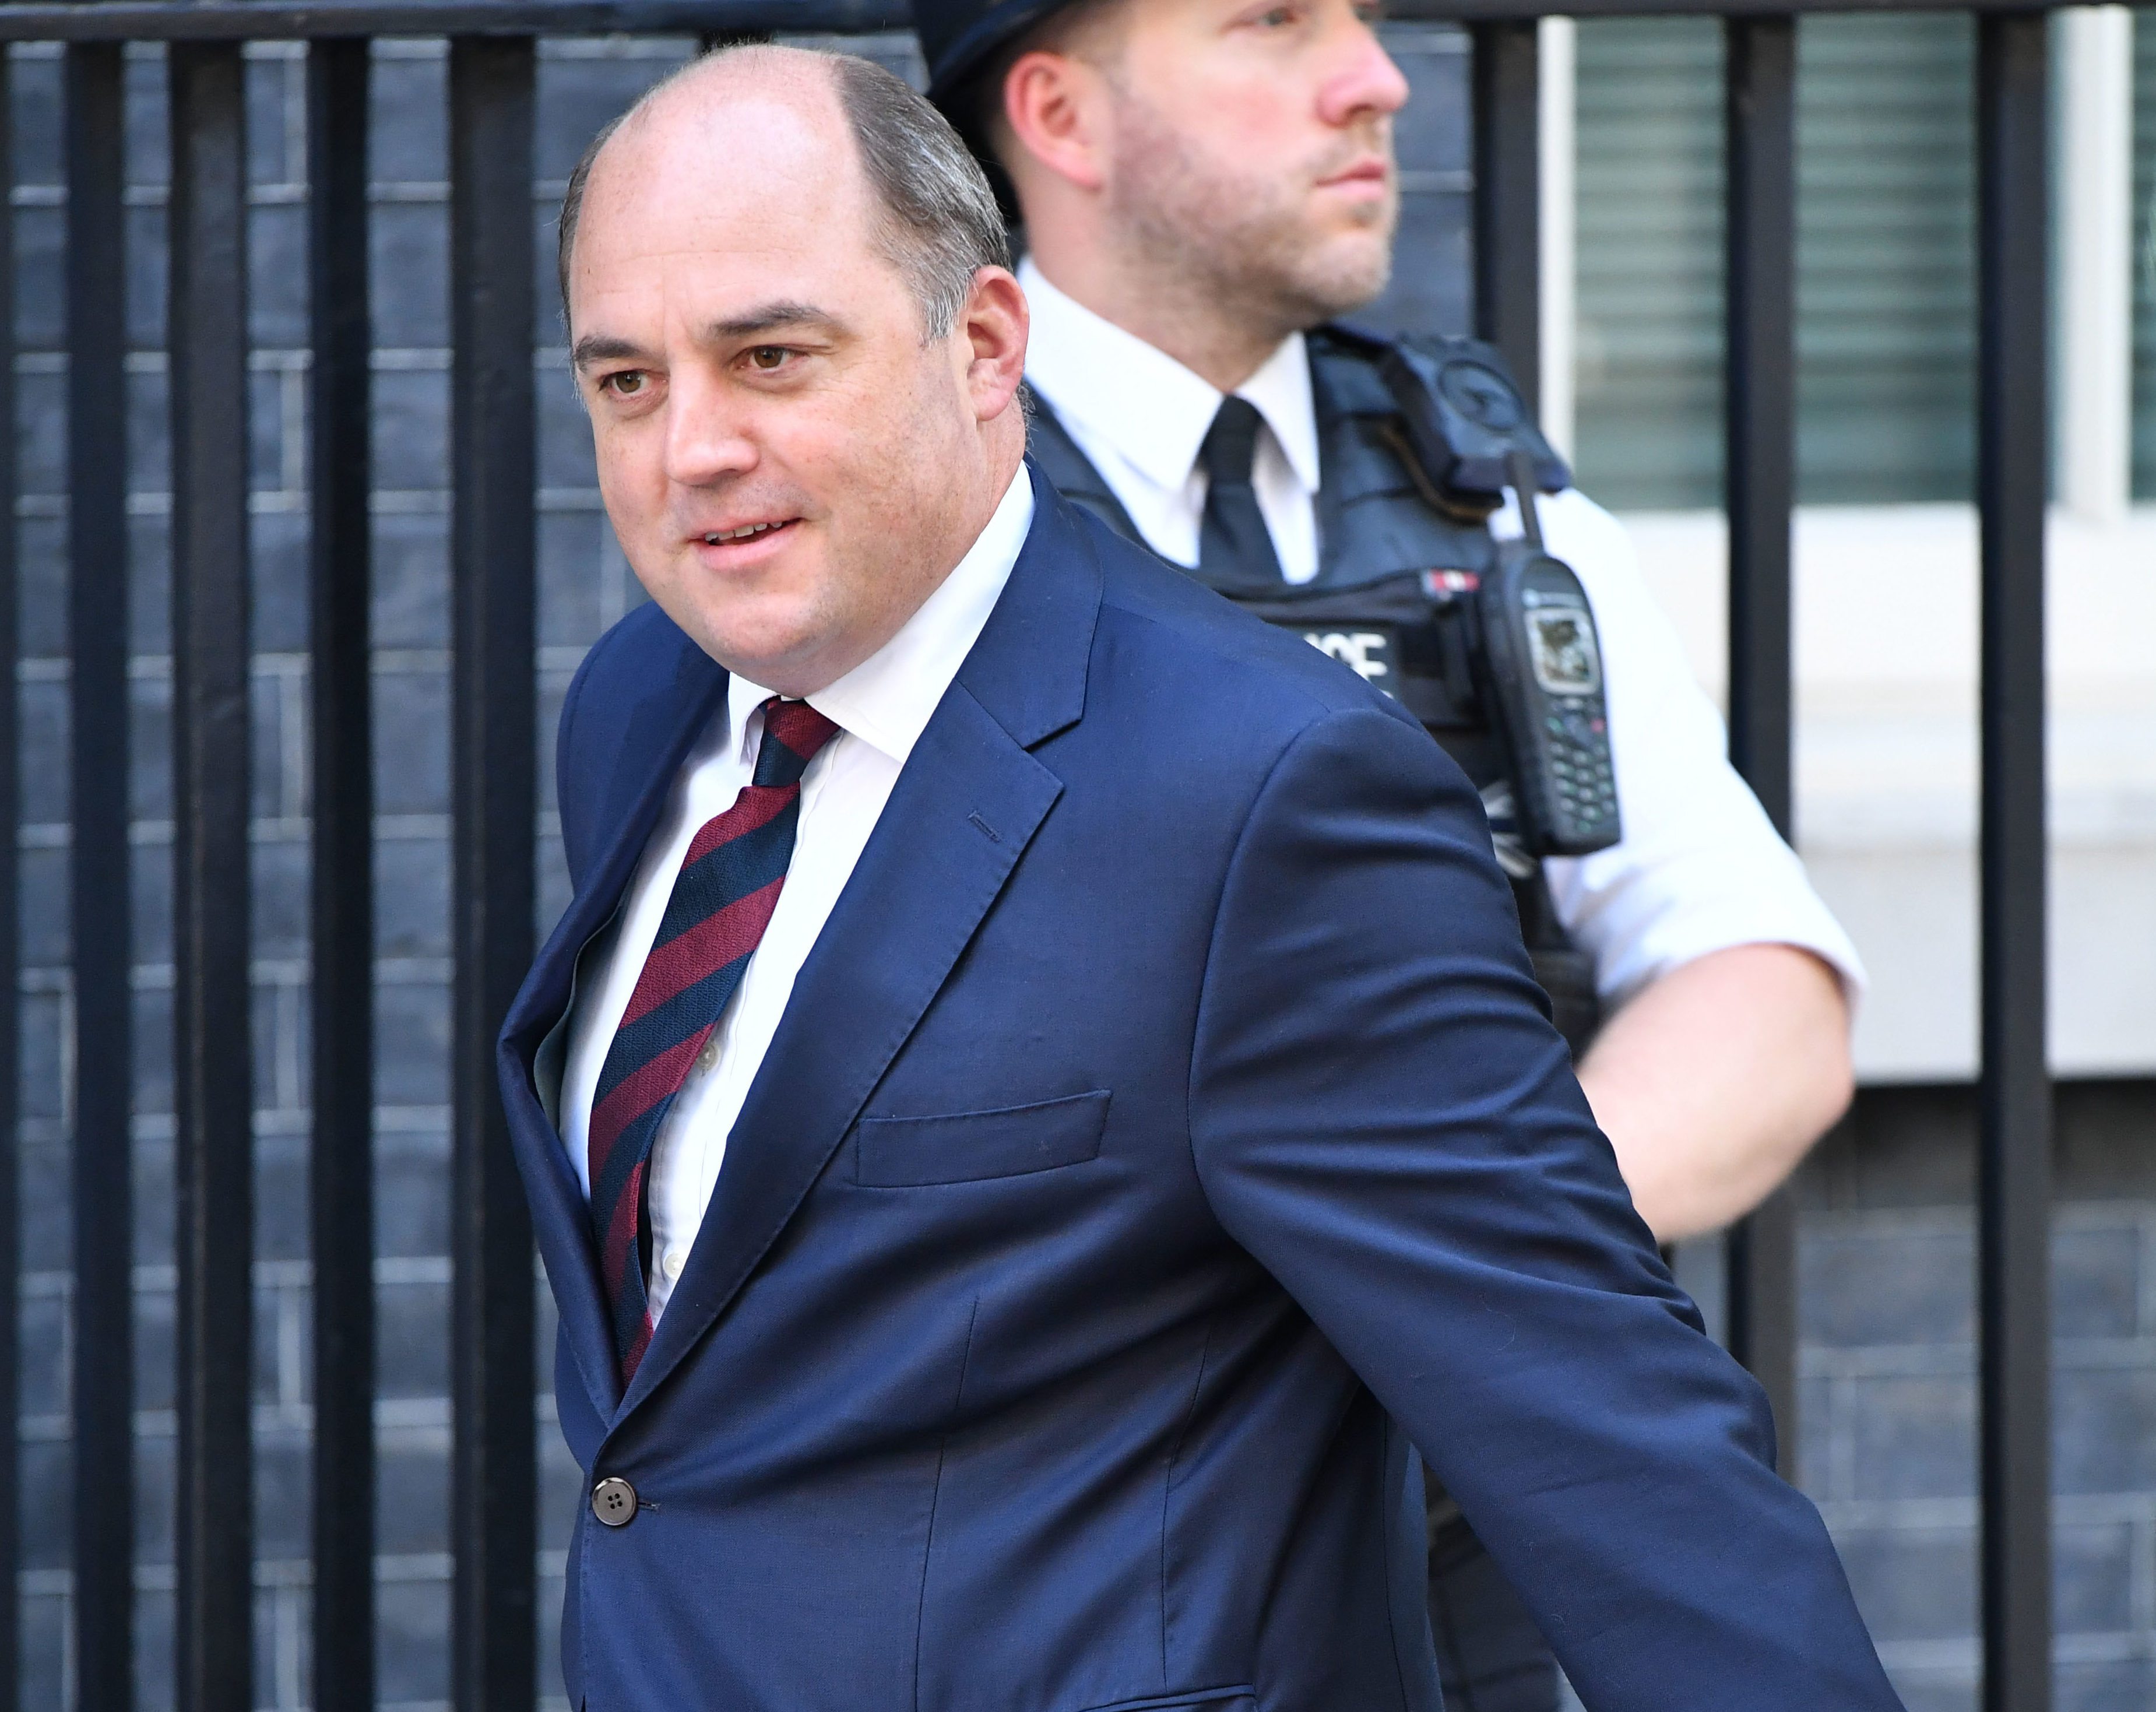 Defence Secretary Ben Wallace arrives at 10 Downing Street on July 25, 2019